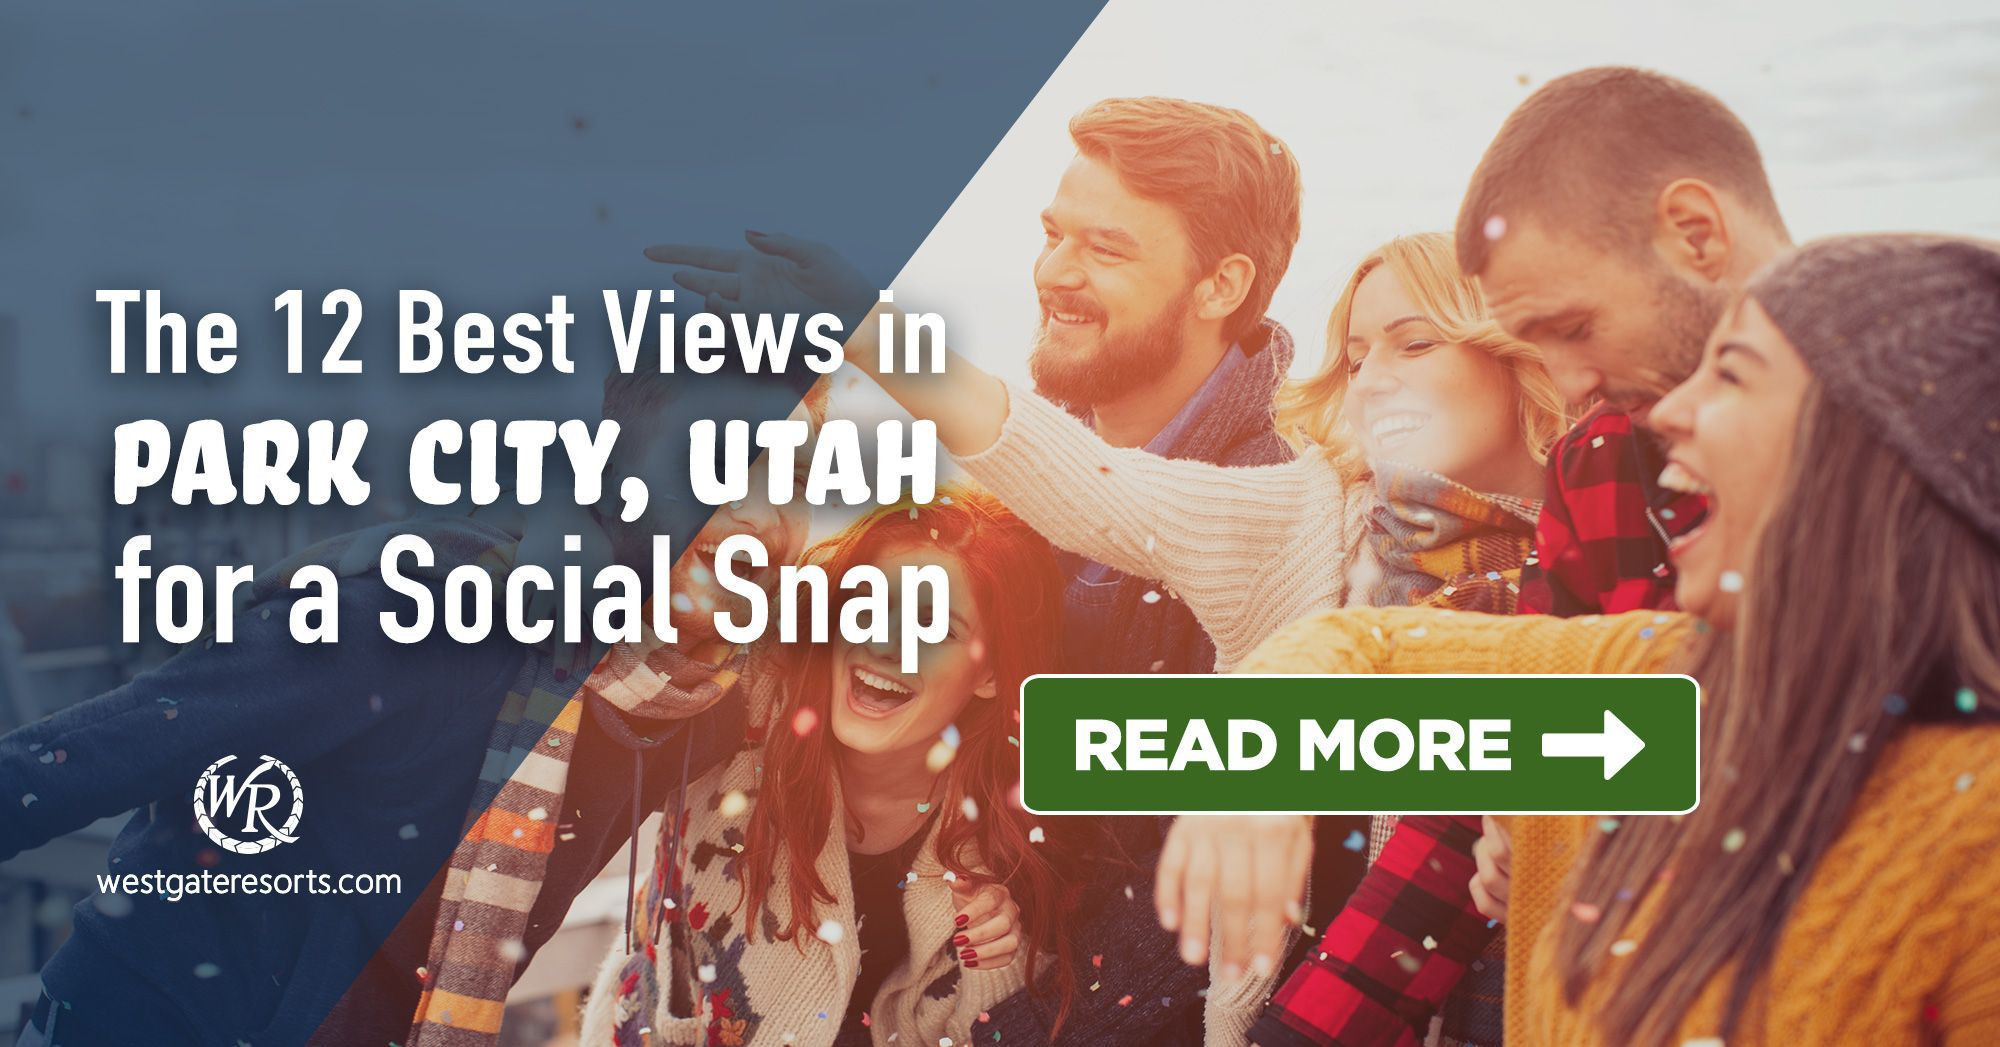 The 12 Best Views in Park City, Utah for a Social Snap